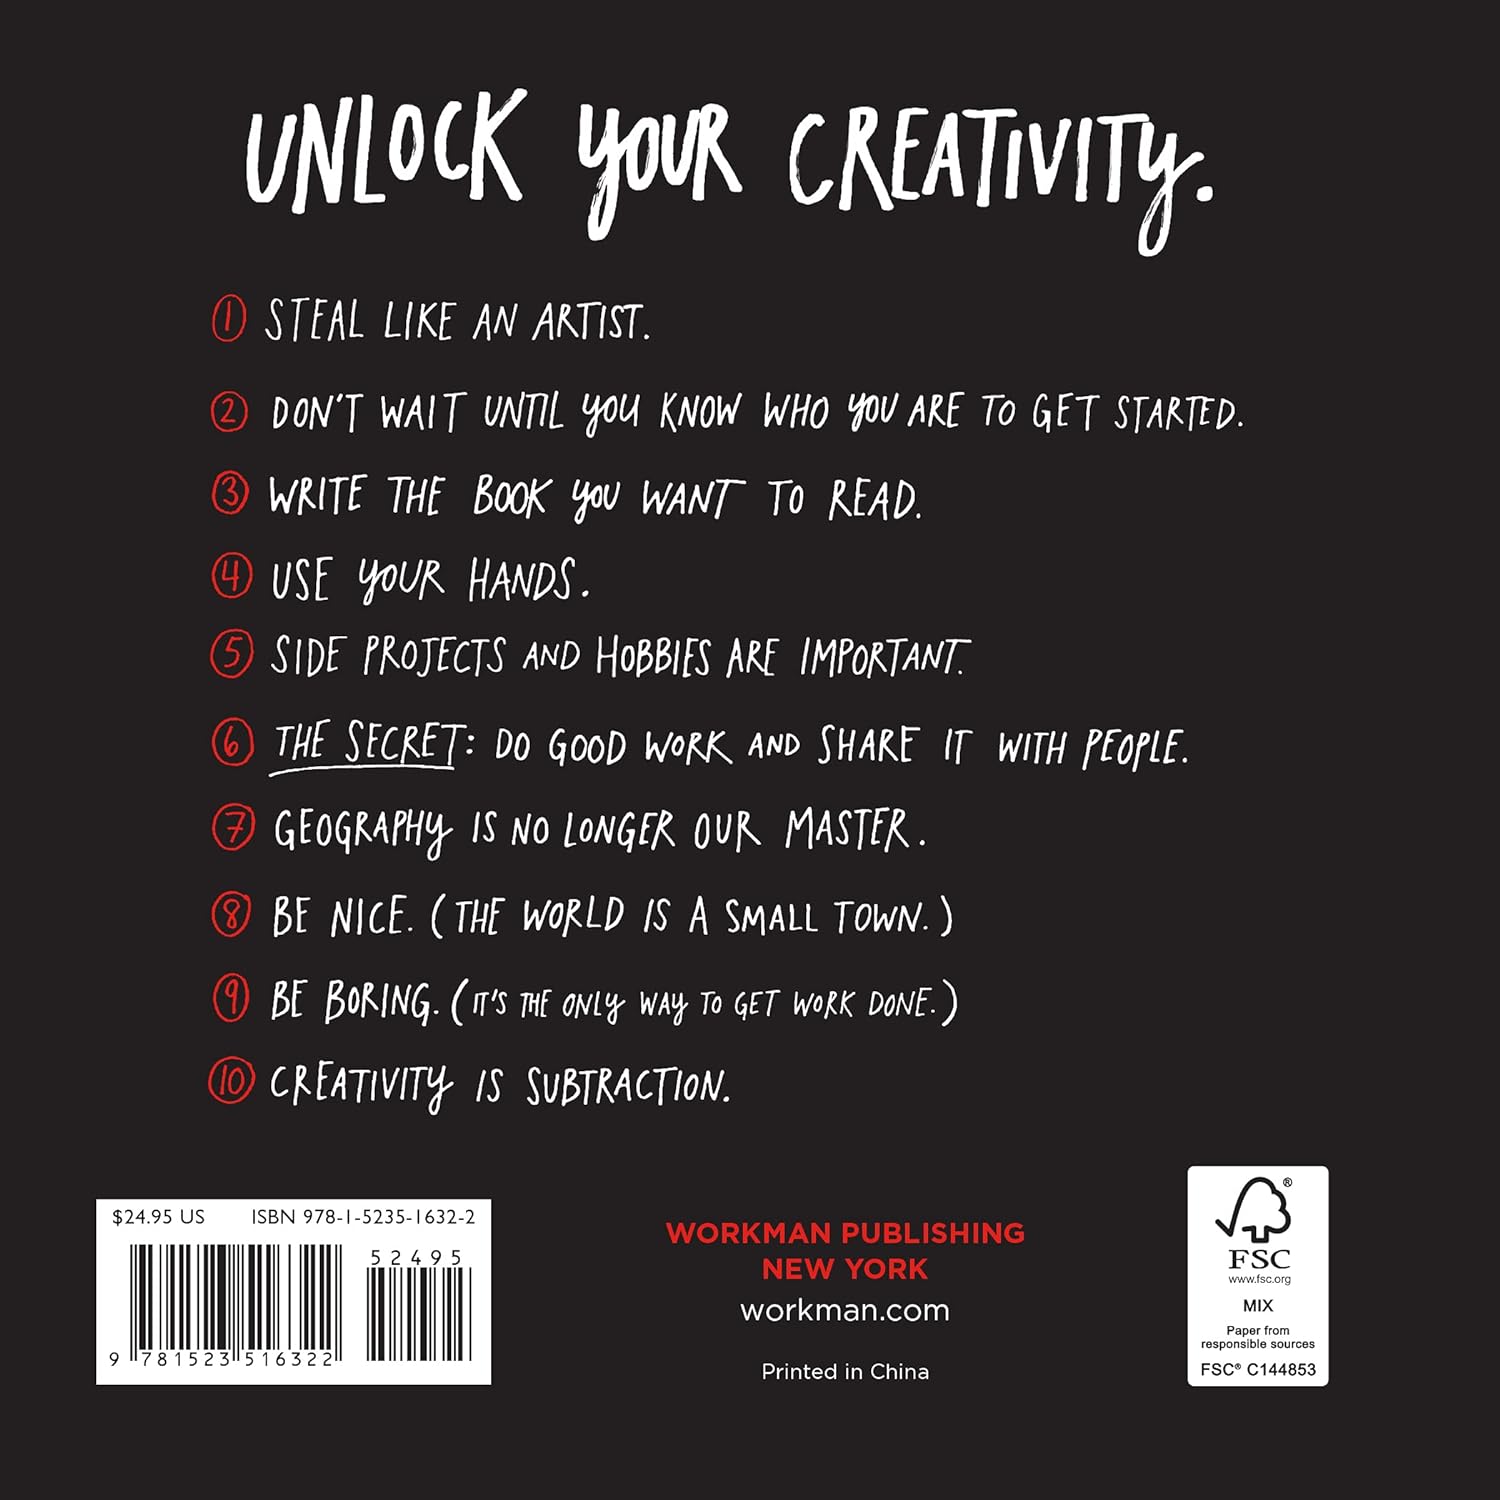 Steal Like an Artist 10th Anniversary Gift Edition with a New Afterword by the Author: 10 Things Nobody Told You About Being Creative (Austin Kleon) Hardcover